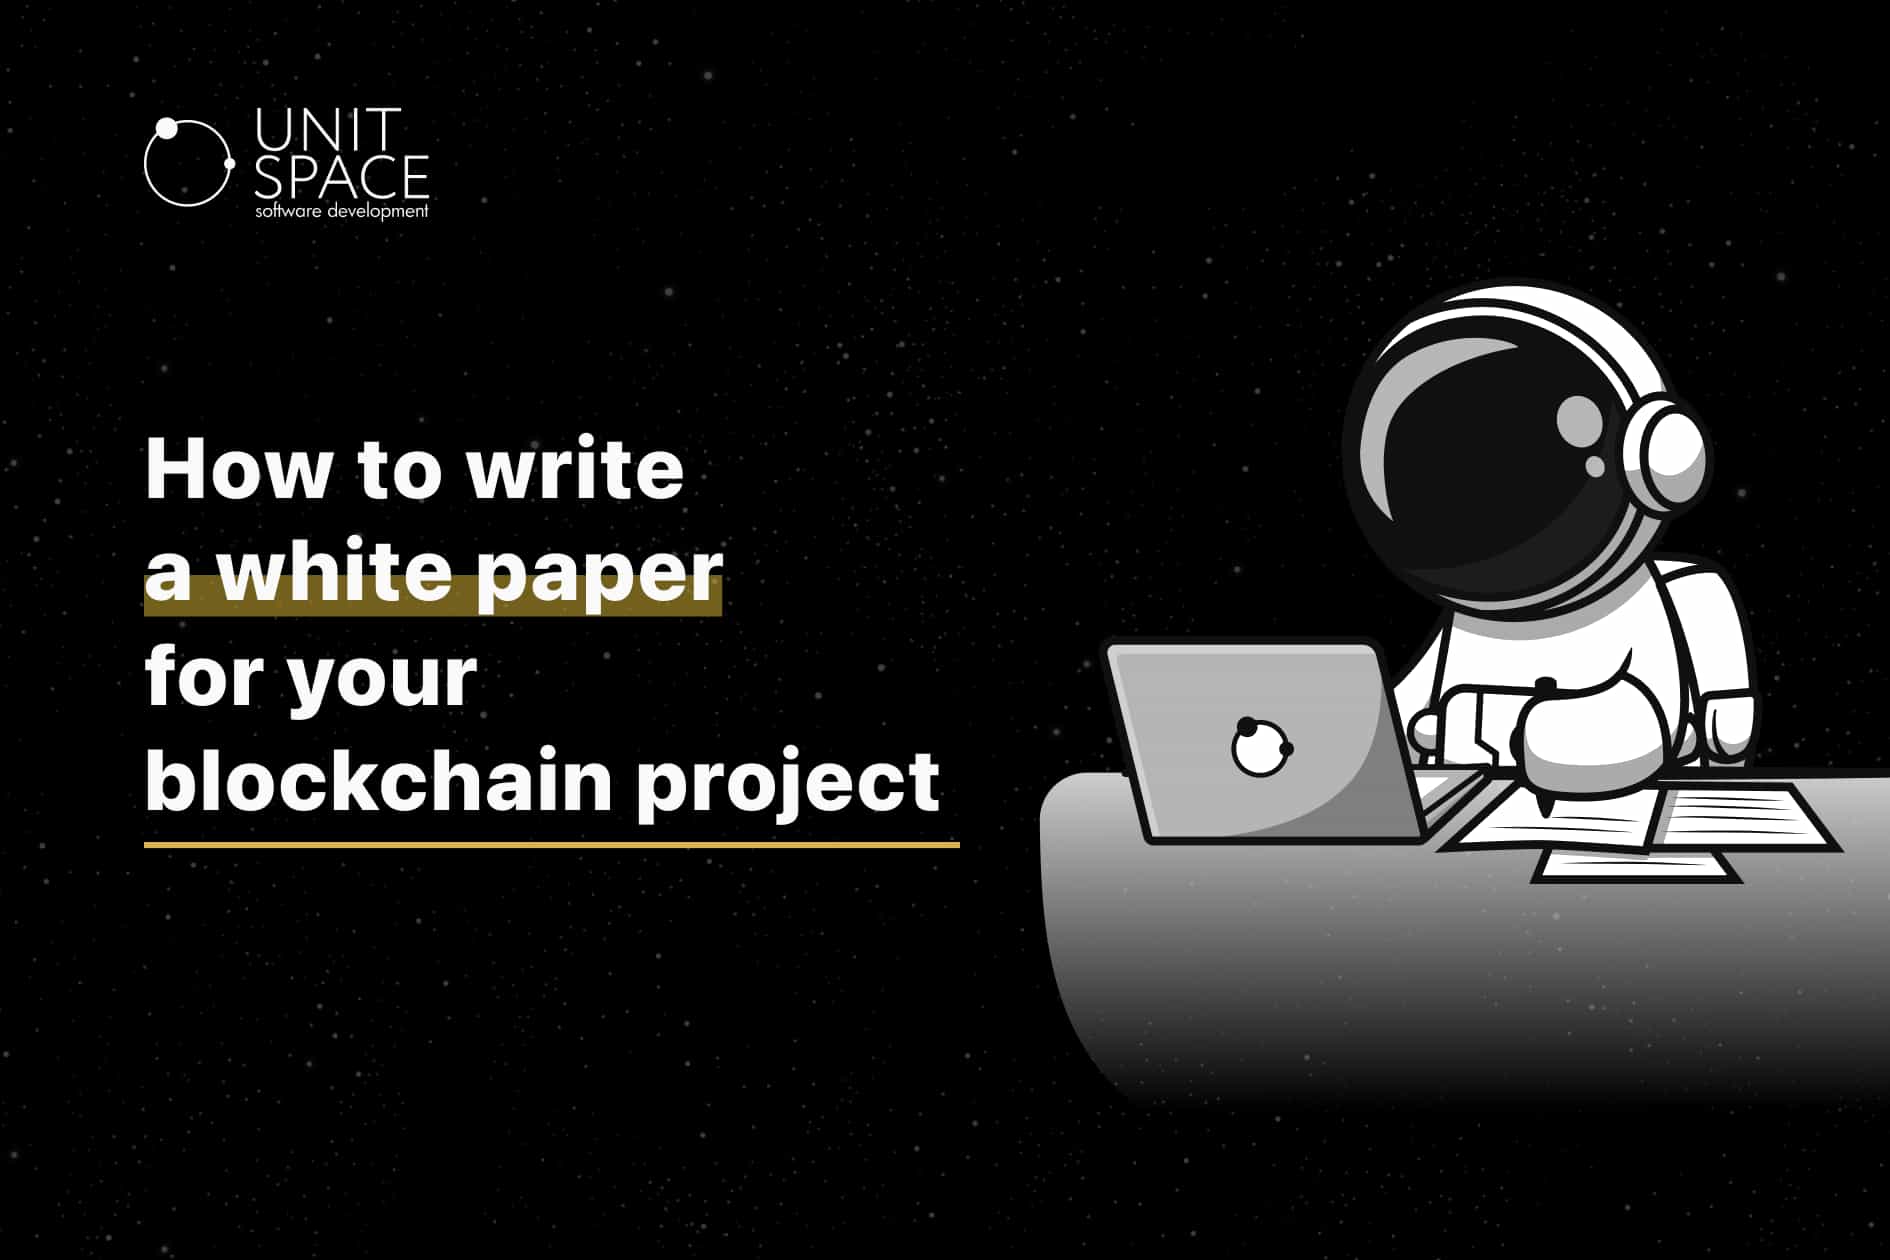 How to write a white paper for your blockchain project